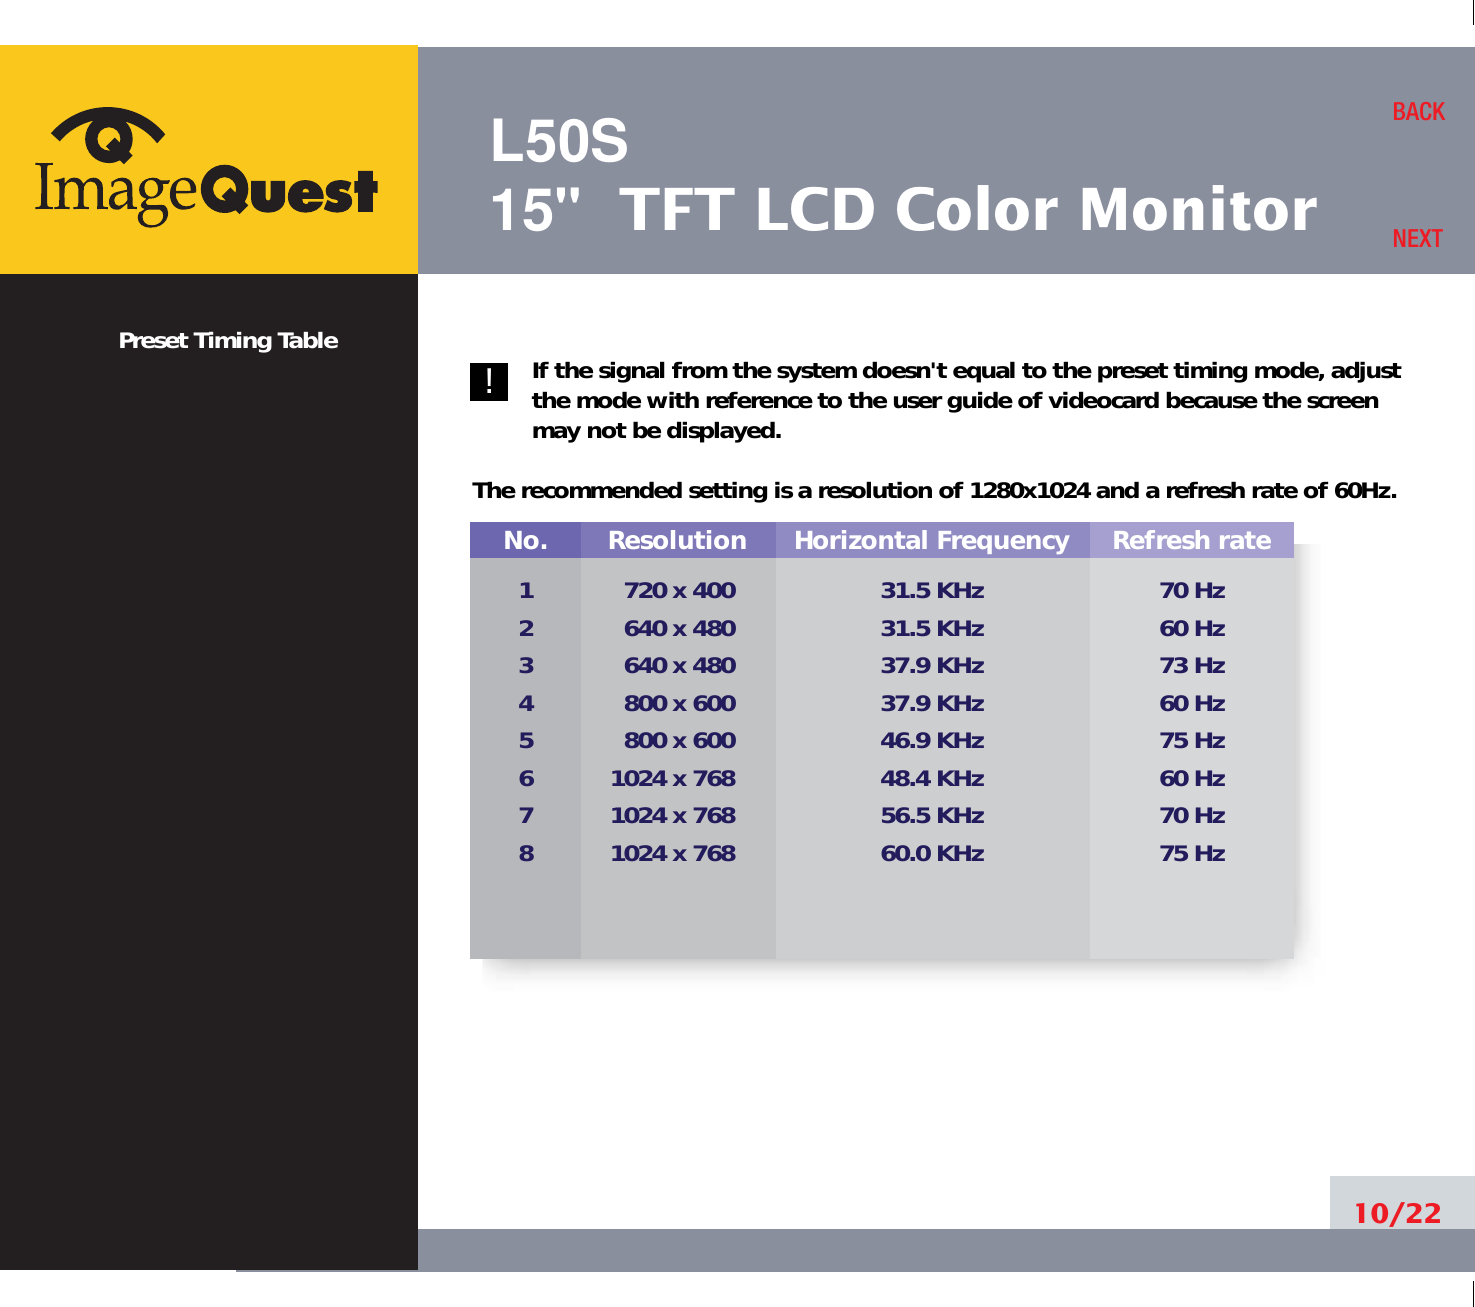 L50S15&quot; TFT LCD Color MonitorPreset Timing Table If the signal from the system doesn&apos;t equal to the preset timing mode, adjustthe mode with reference to the user guide of videocard because the screenmay not be displayed.The recommended setting is a resolution of 1280x1024 and a refresh rate of 60Hz.10/22BACKNEXTNo.12345678Resolution720 x 400640 x 480640 x 480 800 x 600800 x 6001024 x 7681024 x 7681024 x 768Horizontal Frequency31.5 KHz31.5 KHz37.9 KHz37.9 KHz46.9 KHz48.4 KHz56.5 KHz60.0 KHzRefresh rate70 Hz60 Hz73 Hz60 Hz75 Hz60 Hz70 Hz75 Hz!